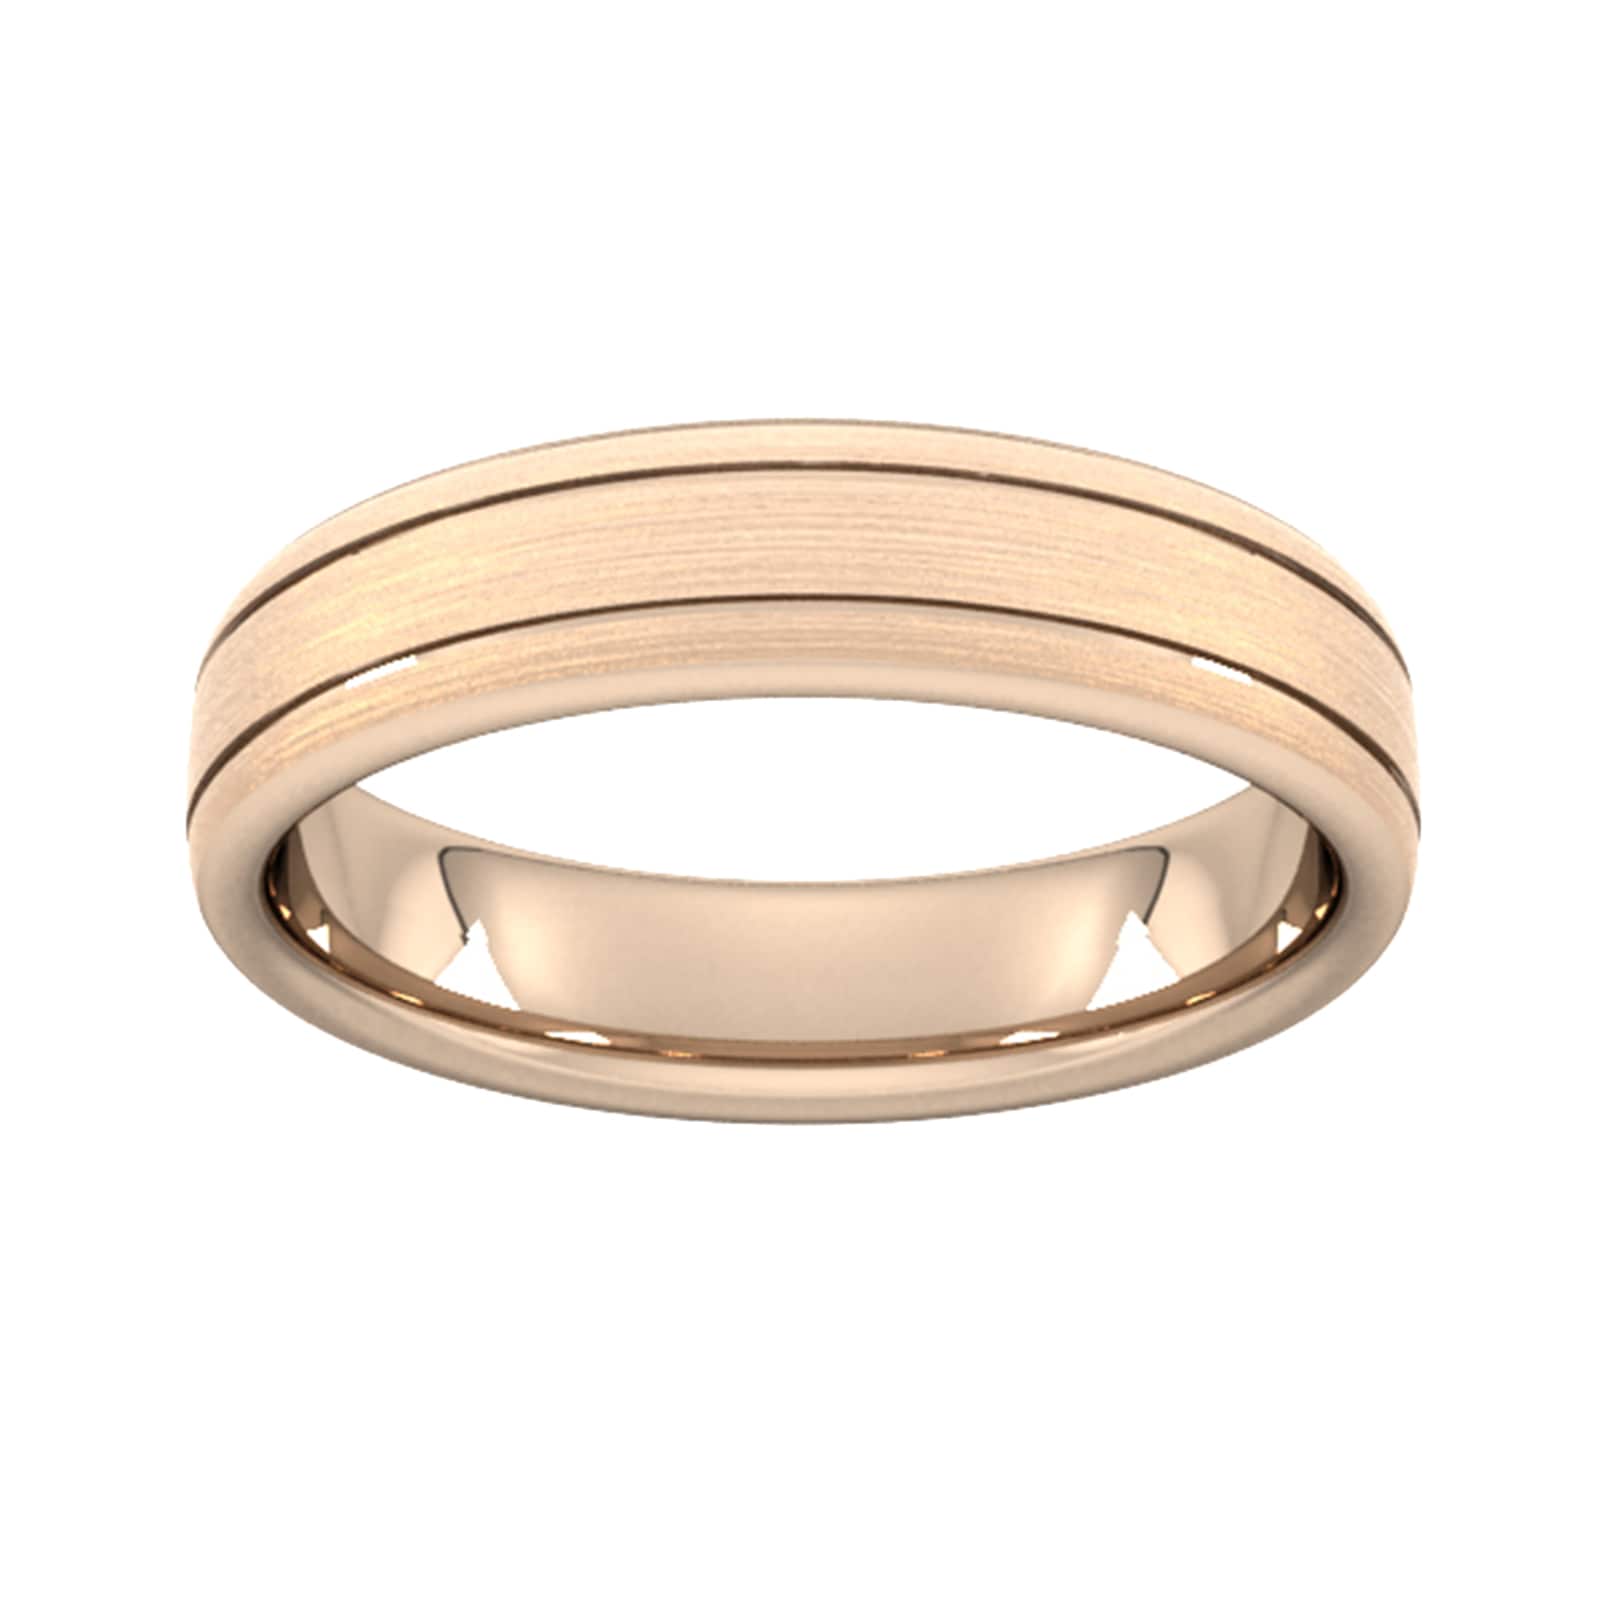 5mm Traditional Court Standard Matt Finish With Double Grooves Wedding Ring In 18 Carat Rose Gold - Ring Size S